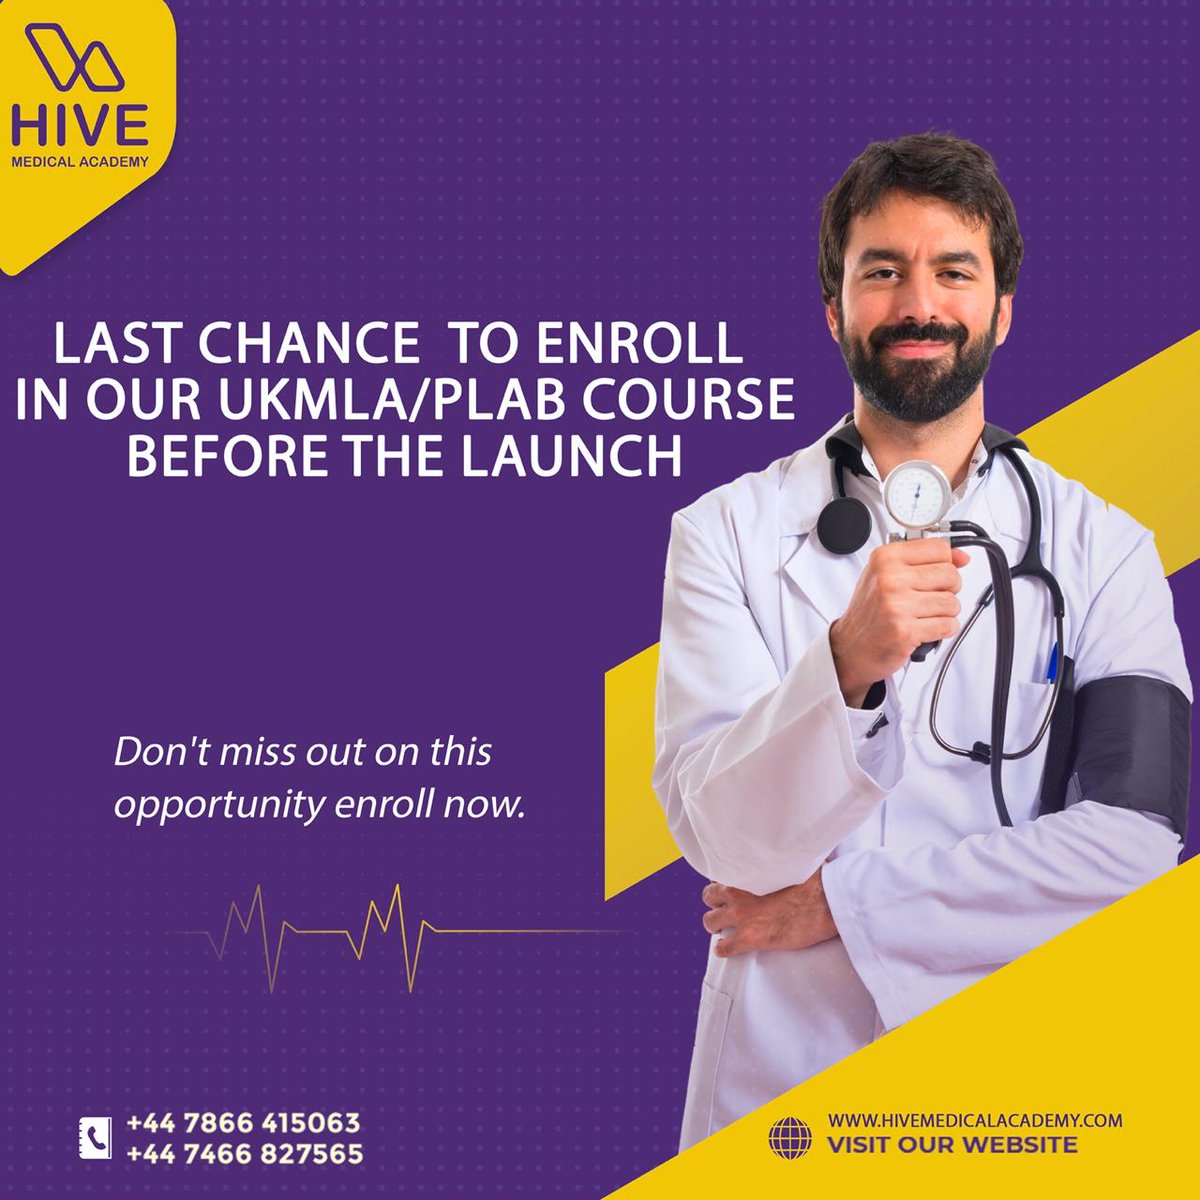 Calling all aspiring UK doctors our renowned UKMLA/PLAB course starts April 27th. Expert guidance, proven success rates. Register now and take the first step to your dream career!
#PLAB #HiveMedicalAcademy #UKMedical #MedicalCareer #PLABExam #StudyAbroad
#MedEd #MedicalStudents